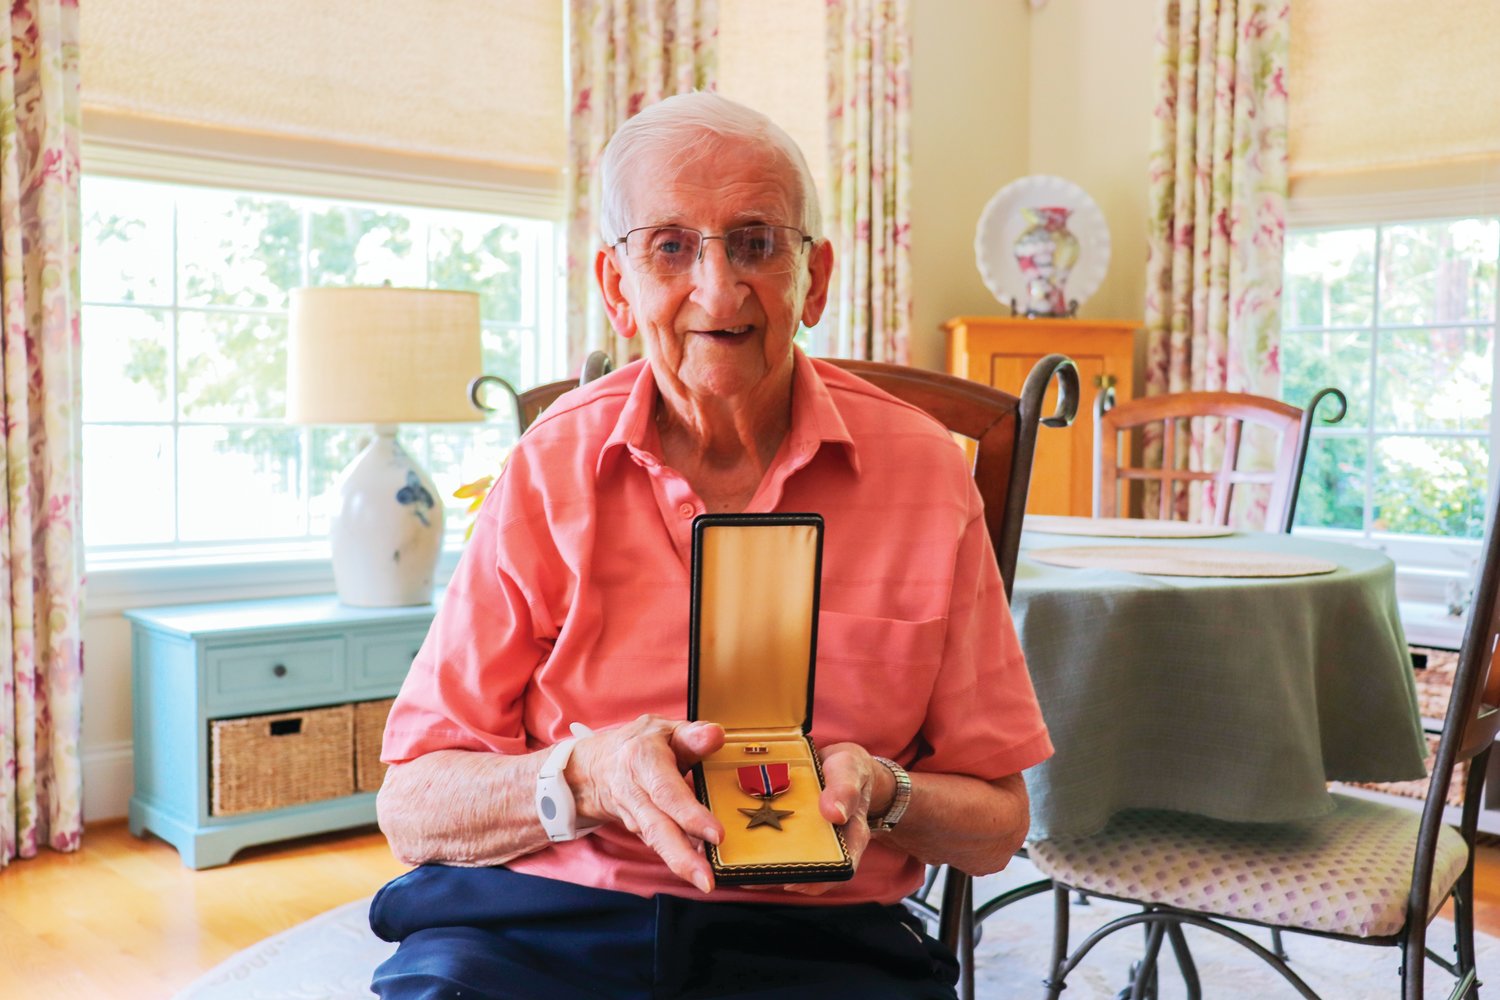 Hart shows off his Bronze Star award, given for his exemplary service during the Battle of the Bulge in World War II. Knowing about the Bronze Star encouraged his daughters agree to a friend's suggestion that Hart agree to a request to apply for the French Legion of Honor.